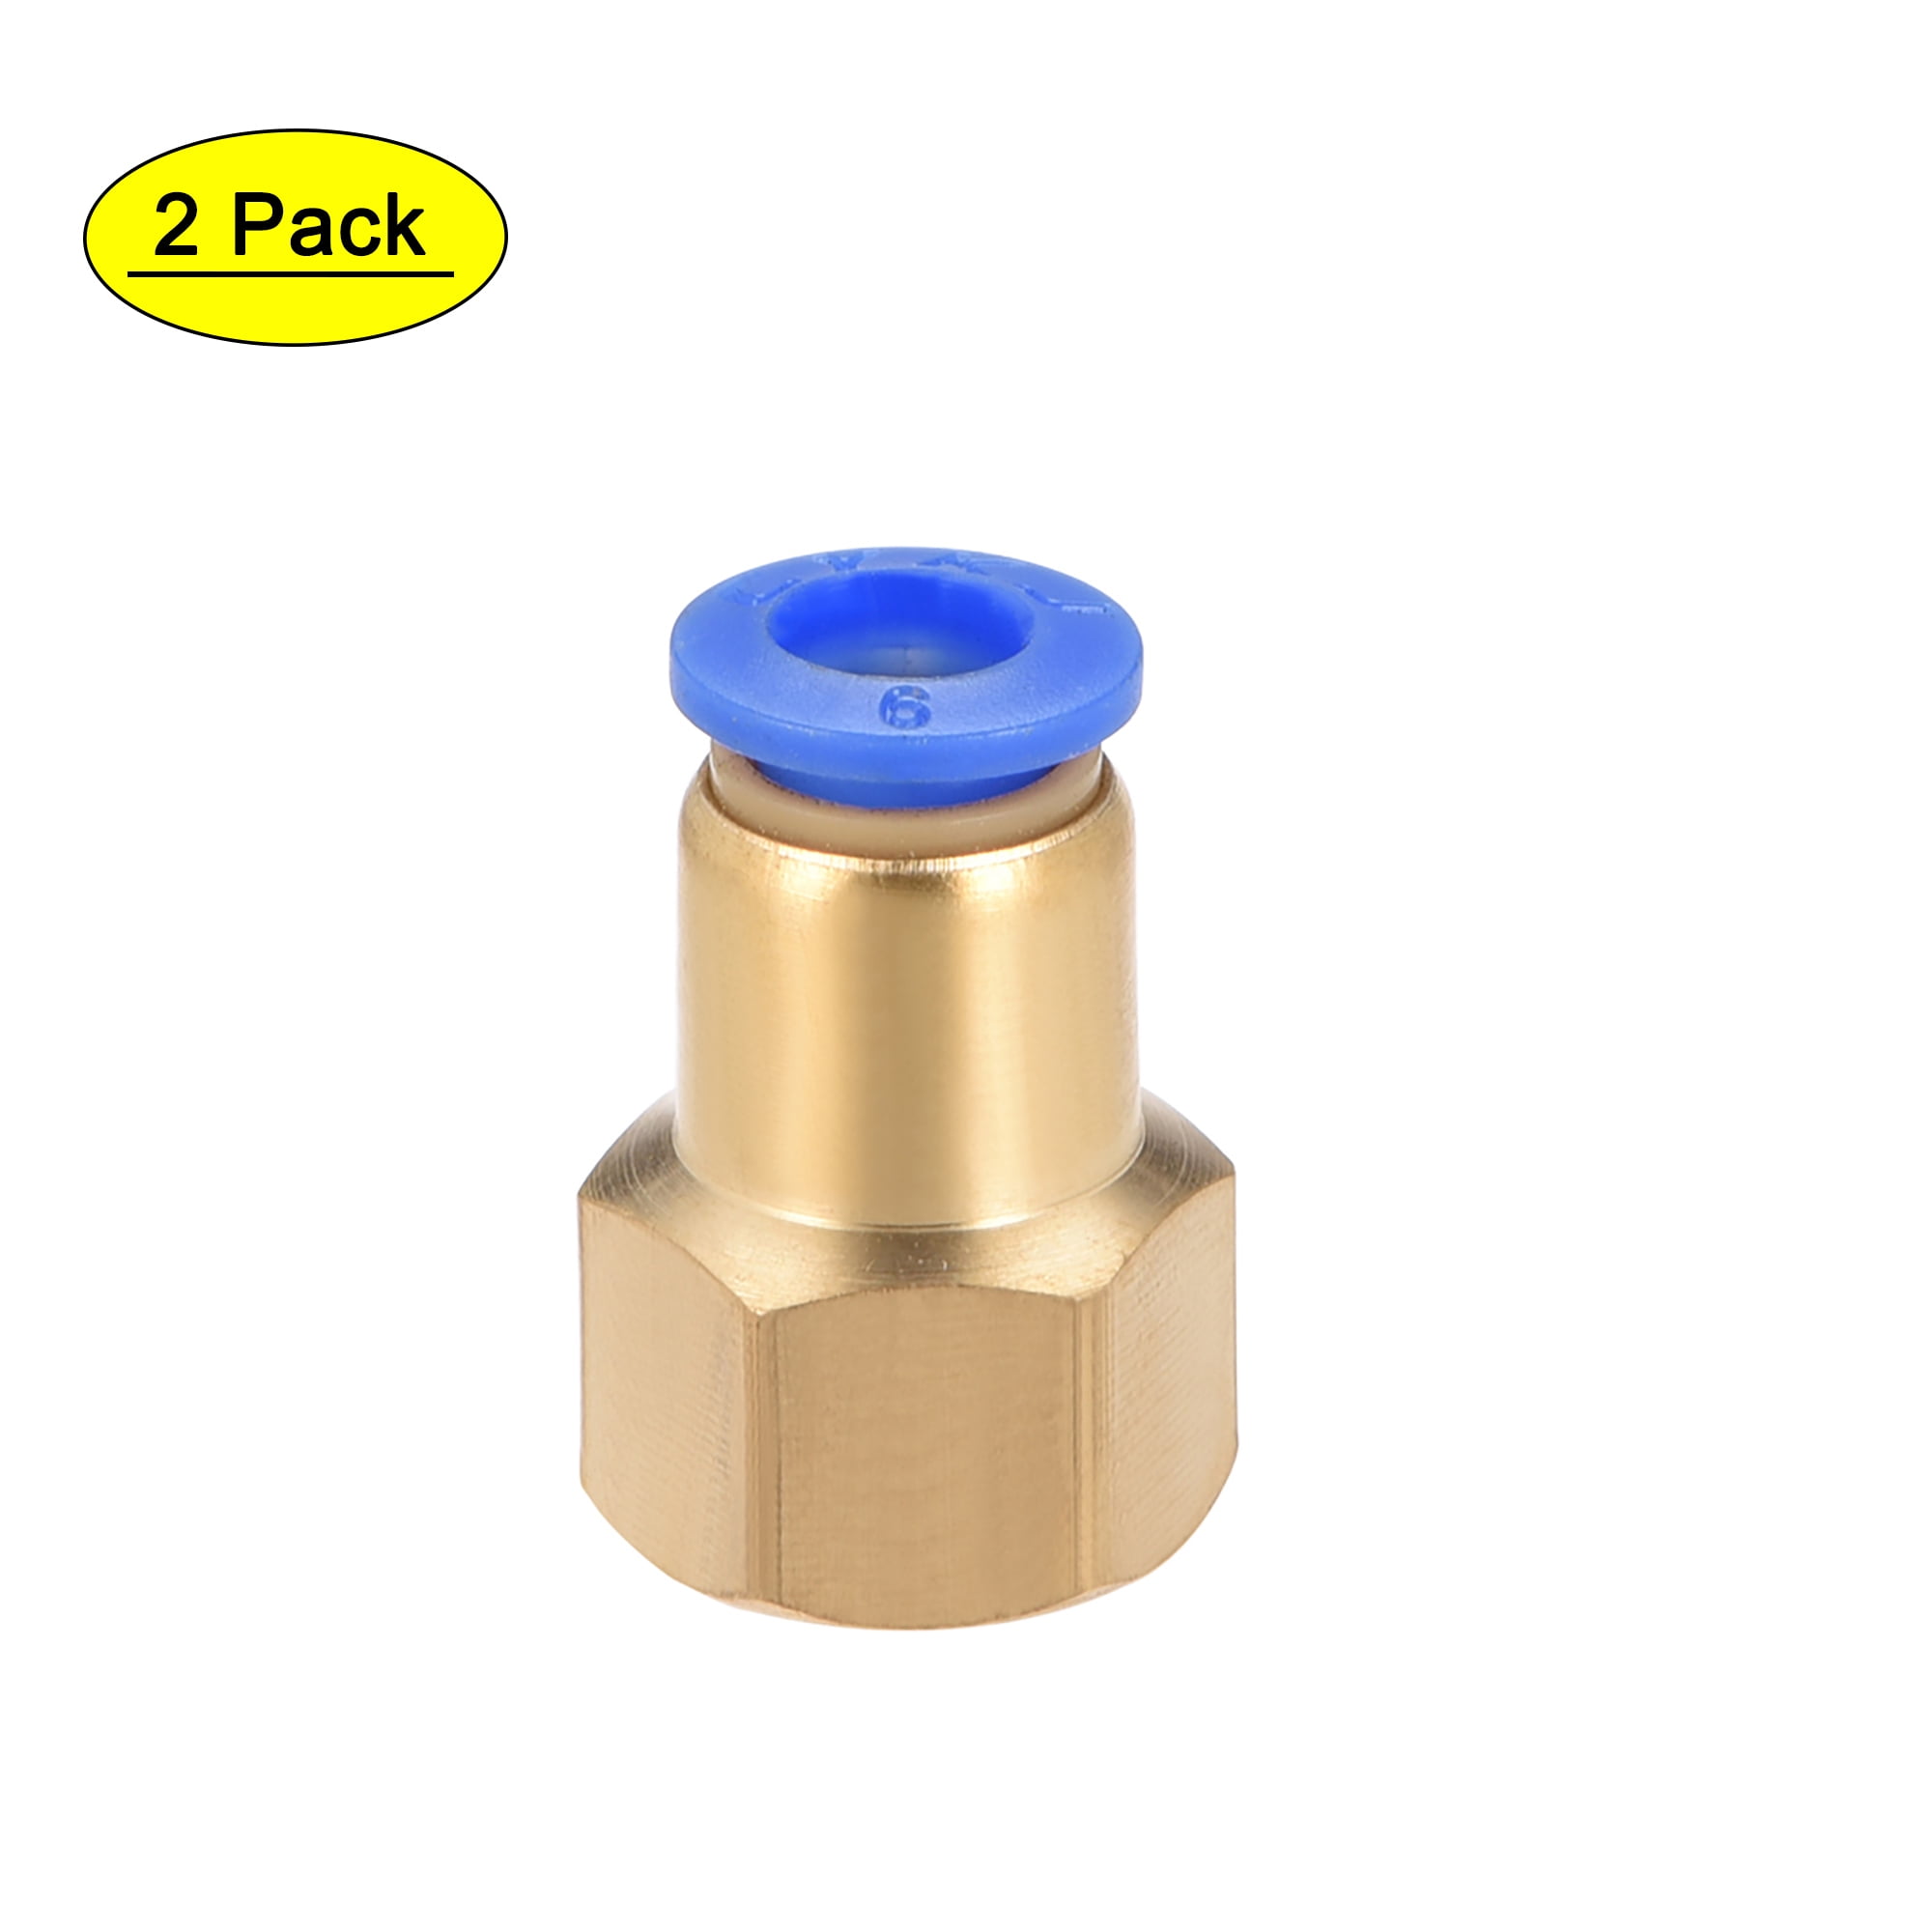 uxcell Push to Connect Tube Fitting Adapter 6mm Tube OD x G1/4 Female Straight Pneumatic Connecter Connect Pipe Fitting 8pcs 